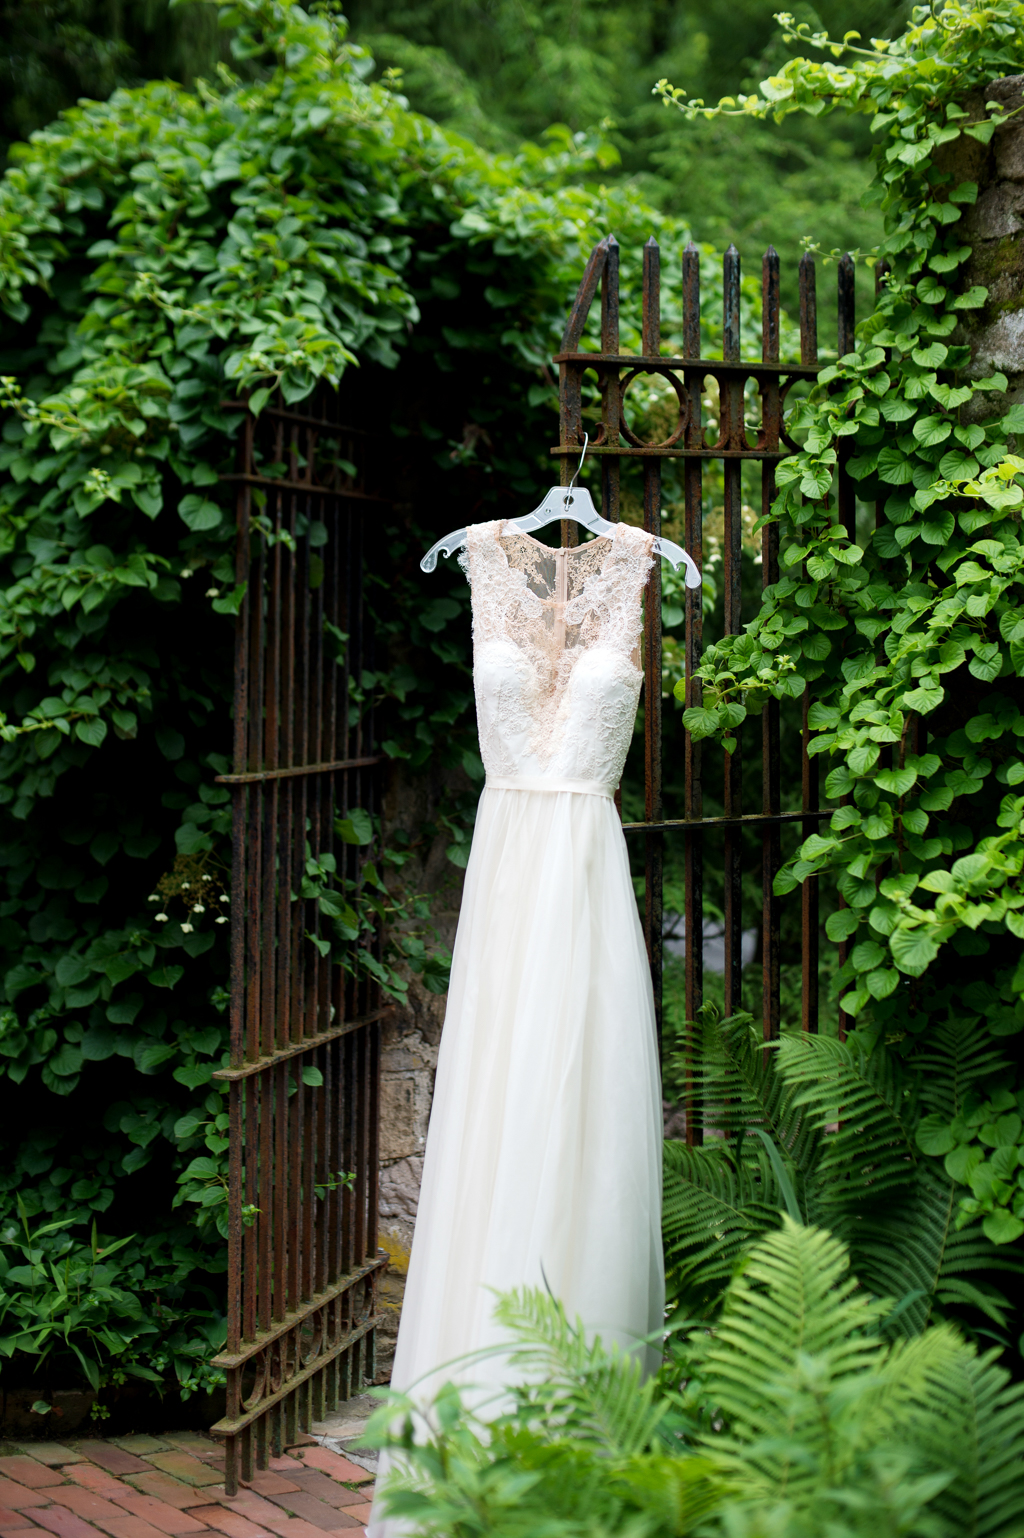 a wedding dress hangs from a wrought iron gate surrounded by ivy